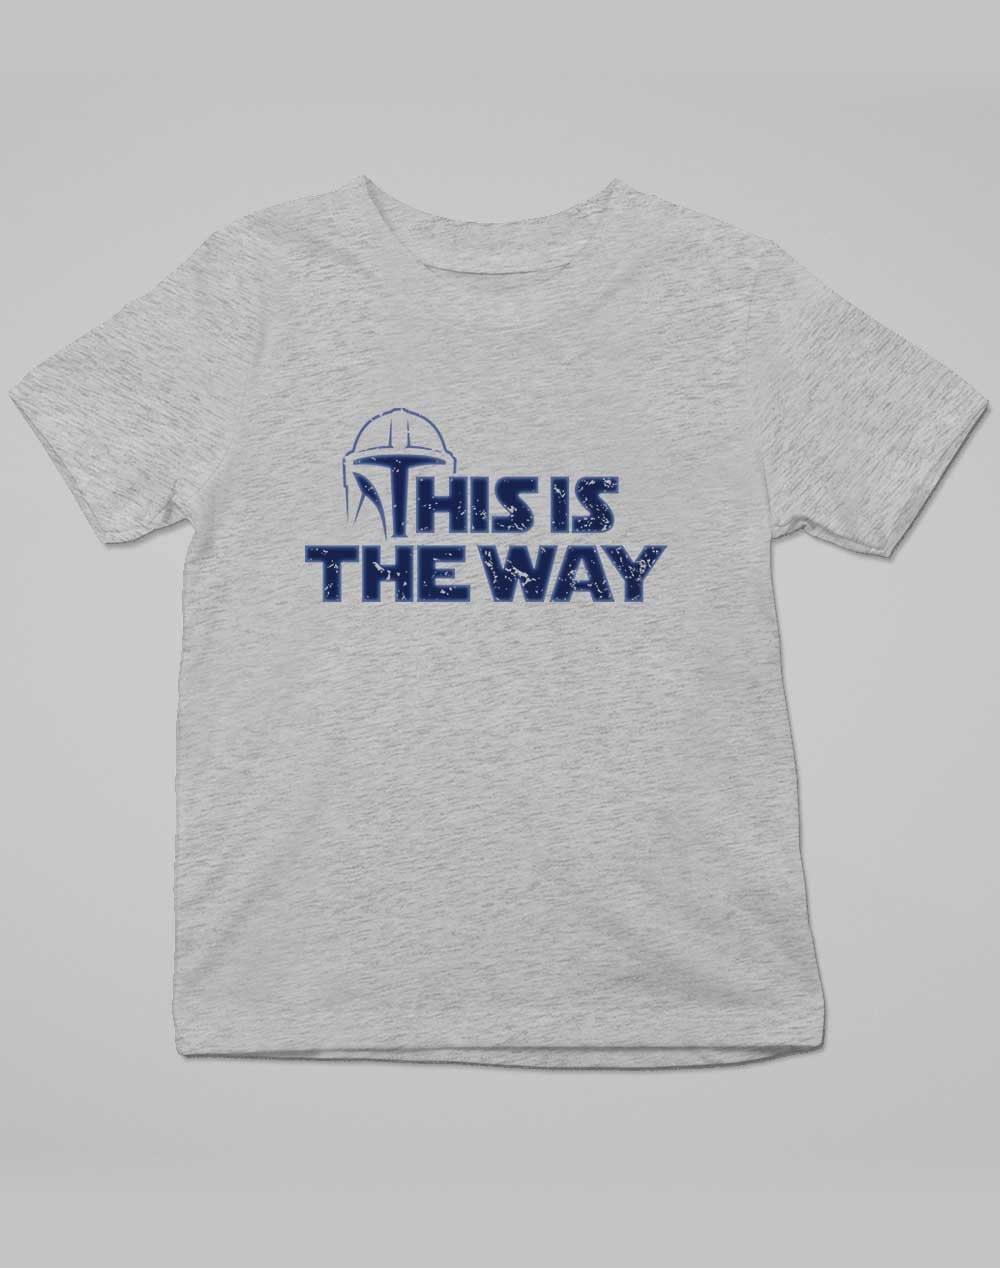 This is the Way - Kids T-Shirt 3-4 years / Grey Marl  - Off World Tees